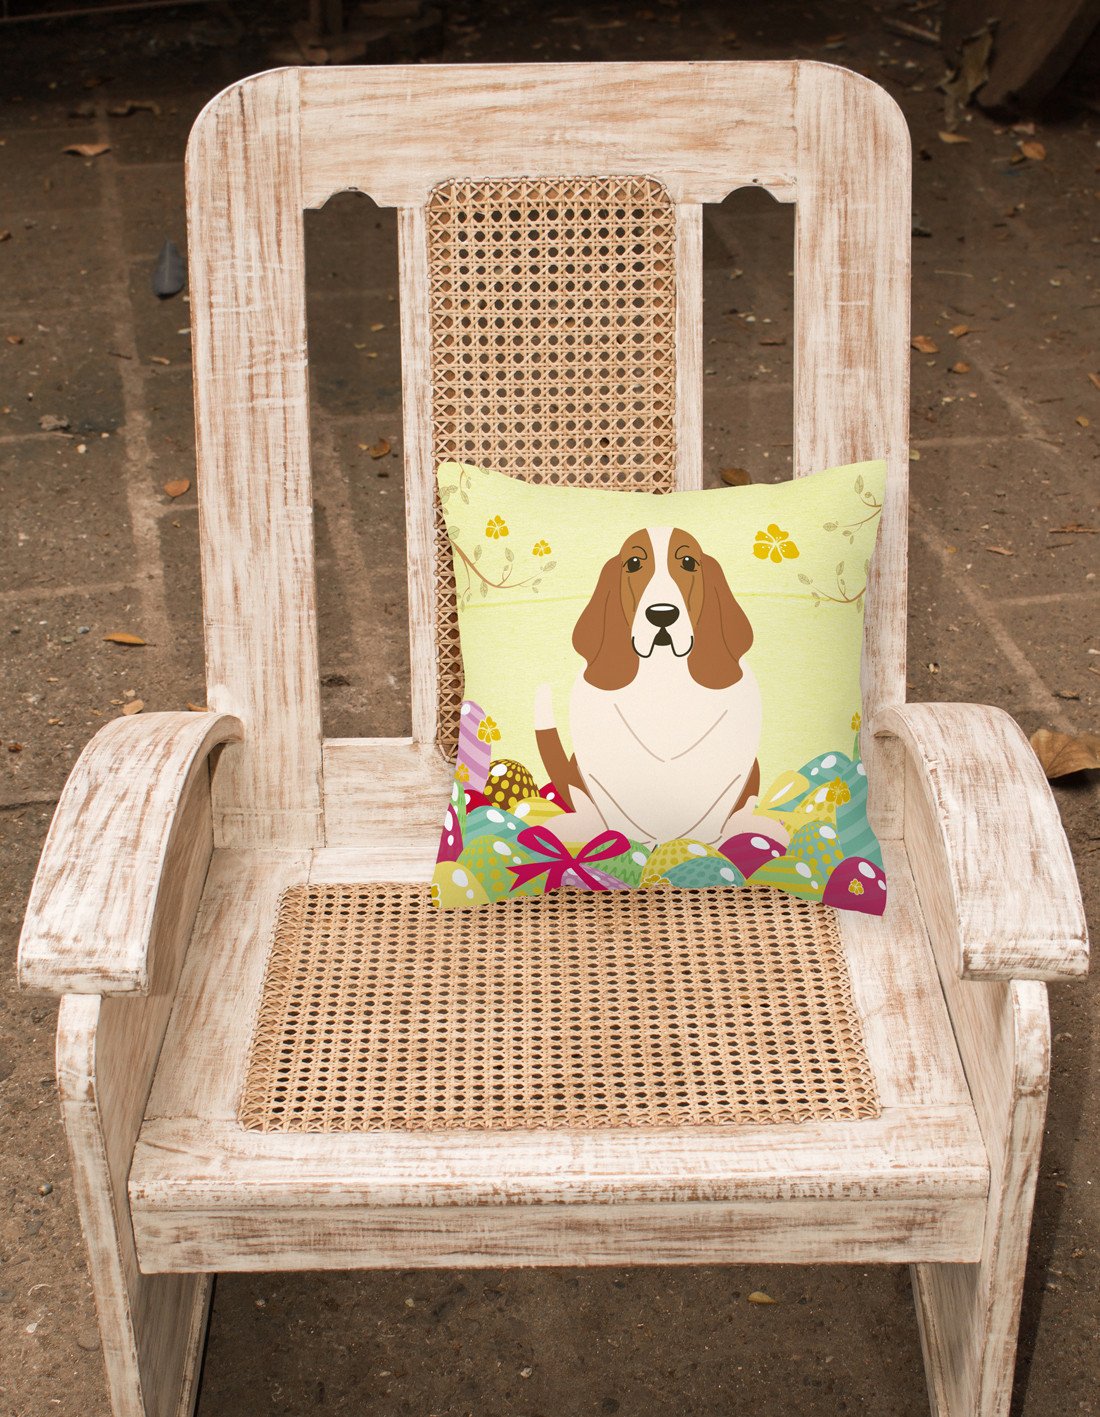 Easter Eggs Basset Hound Fabric Decorative Pillow BB6021PW1818 by Caroline's Treasures